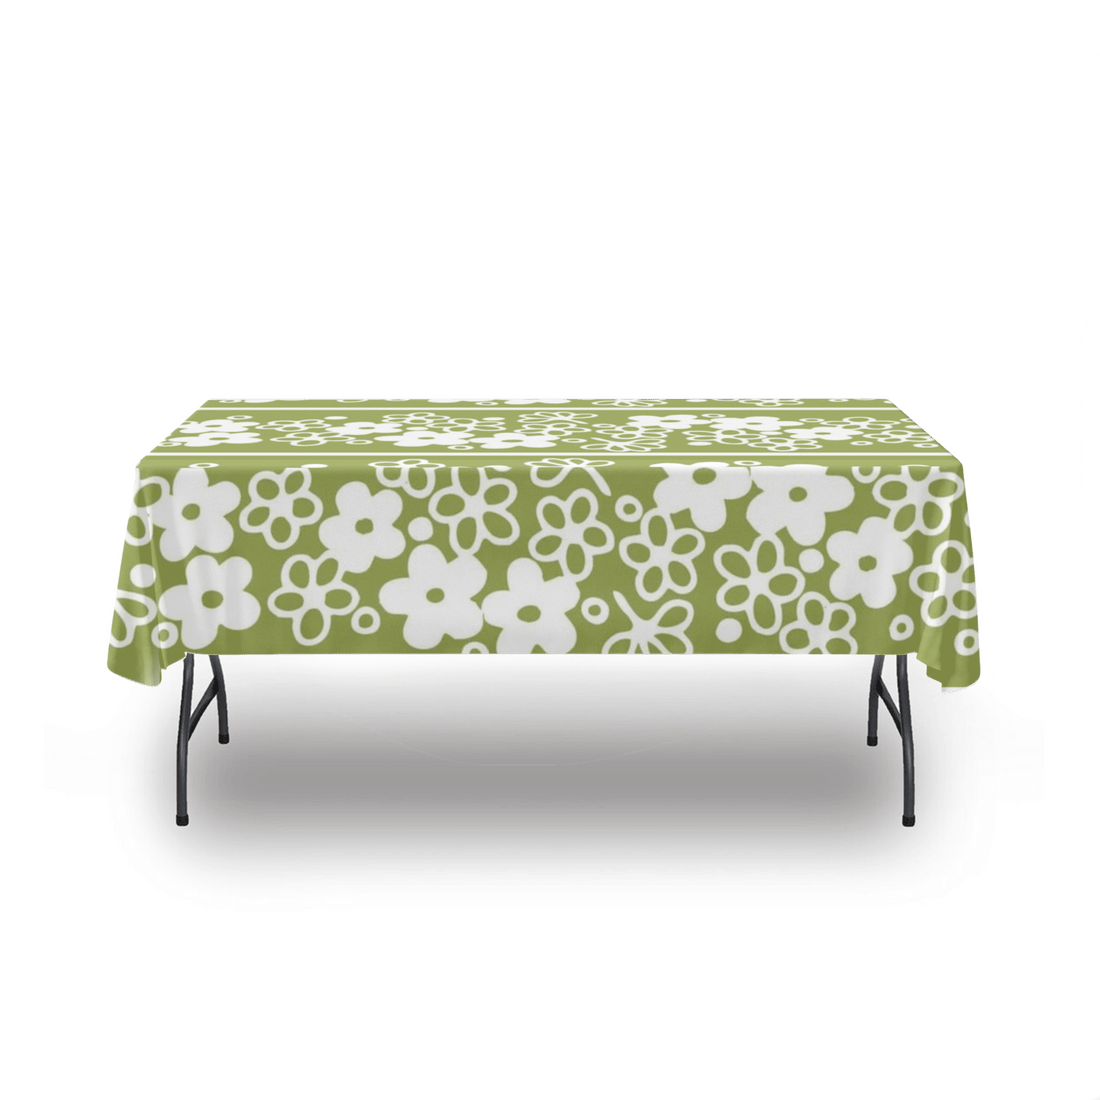 Retro Green, Spring Blossom, Pyrex Lover, Mod Daisy MCM Tablecloth tablecloth 54&quot; x 72&quot;